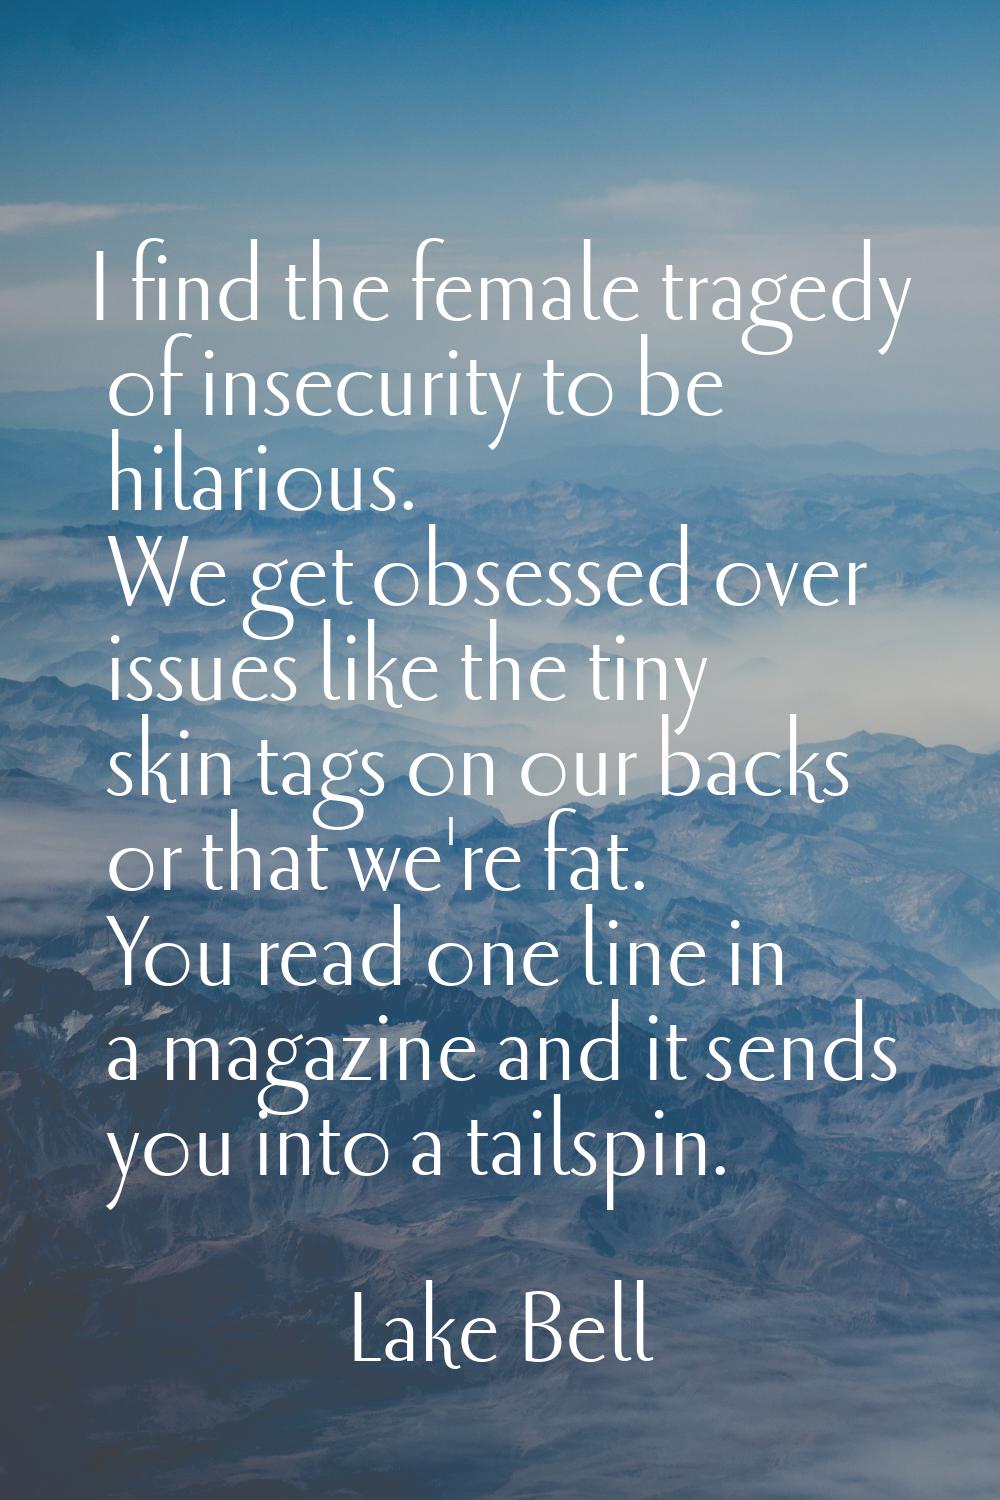 I find the female tragedy of insecurity to be hilarious. We get obsessed over issues like the tiny 